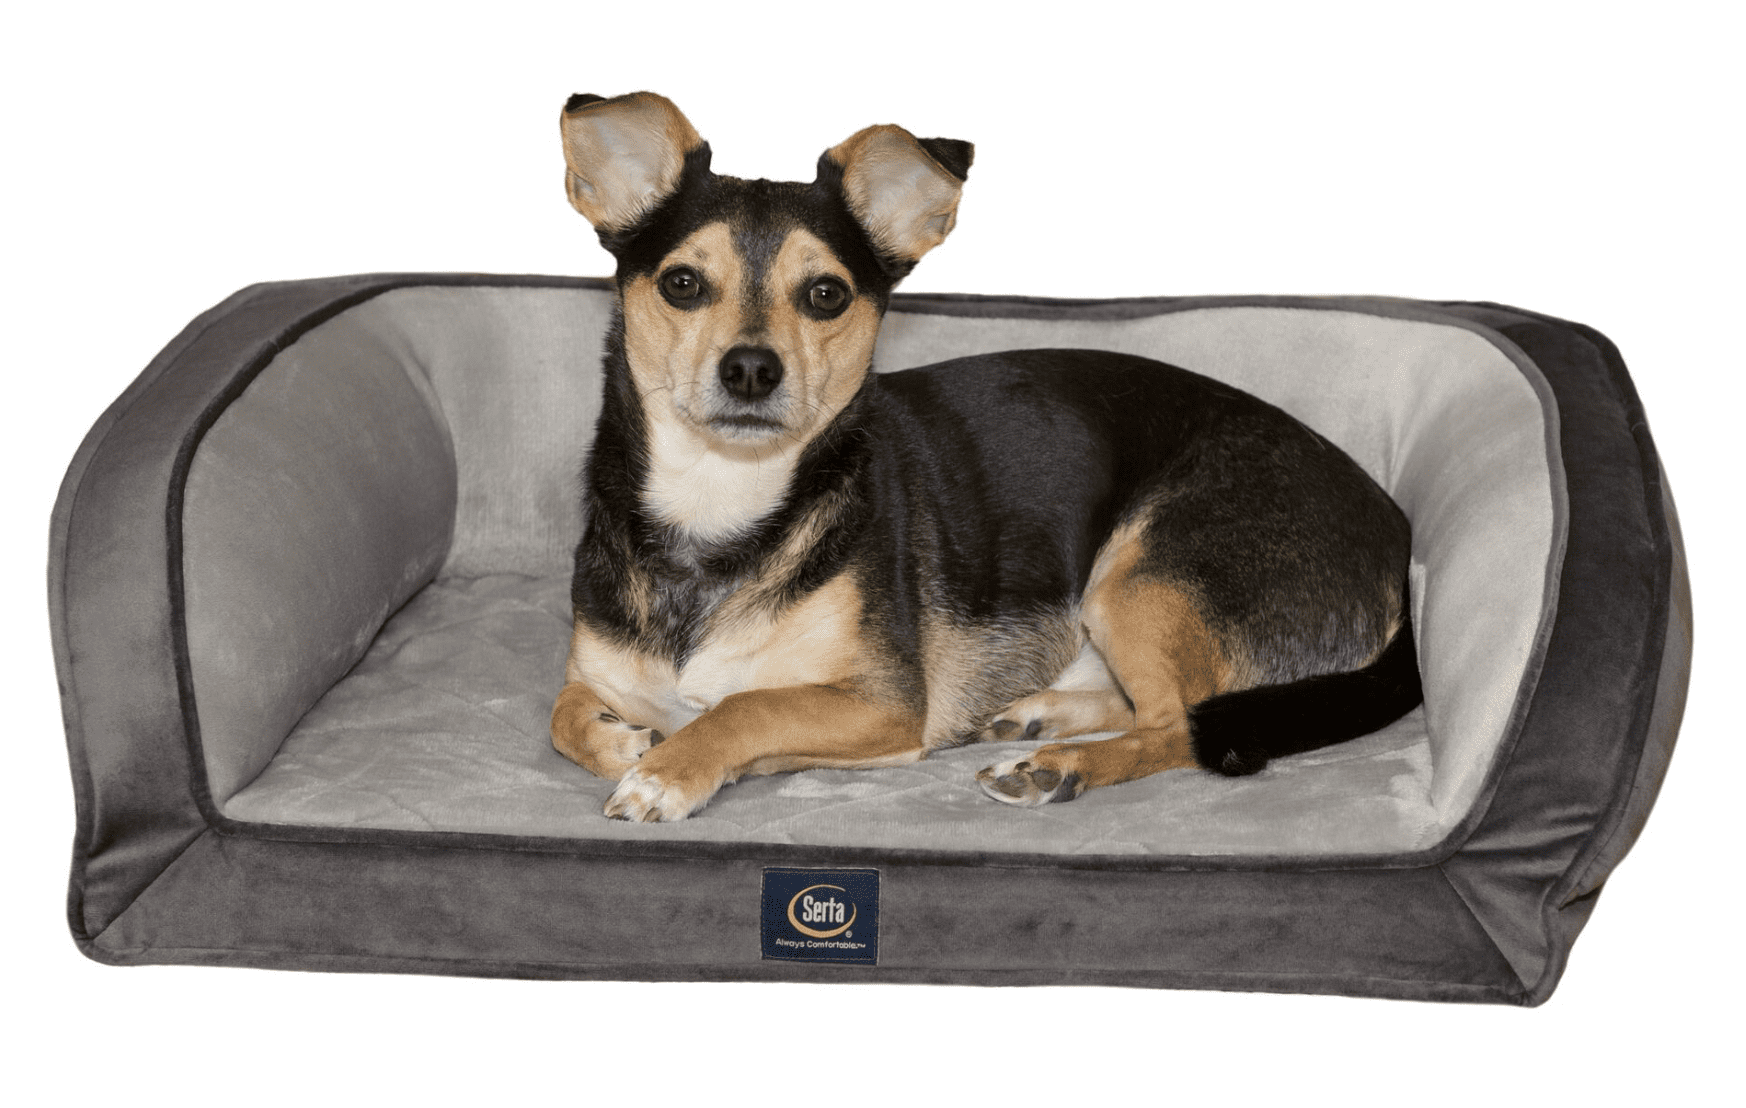 mini couch for dogs